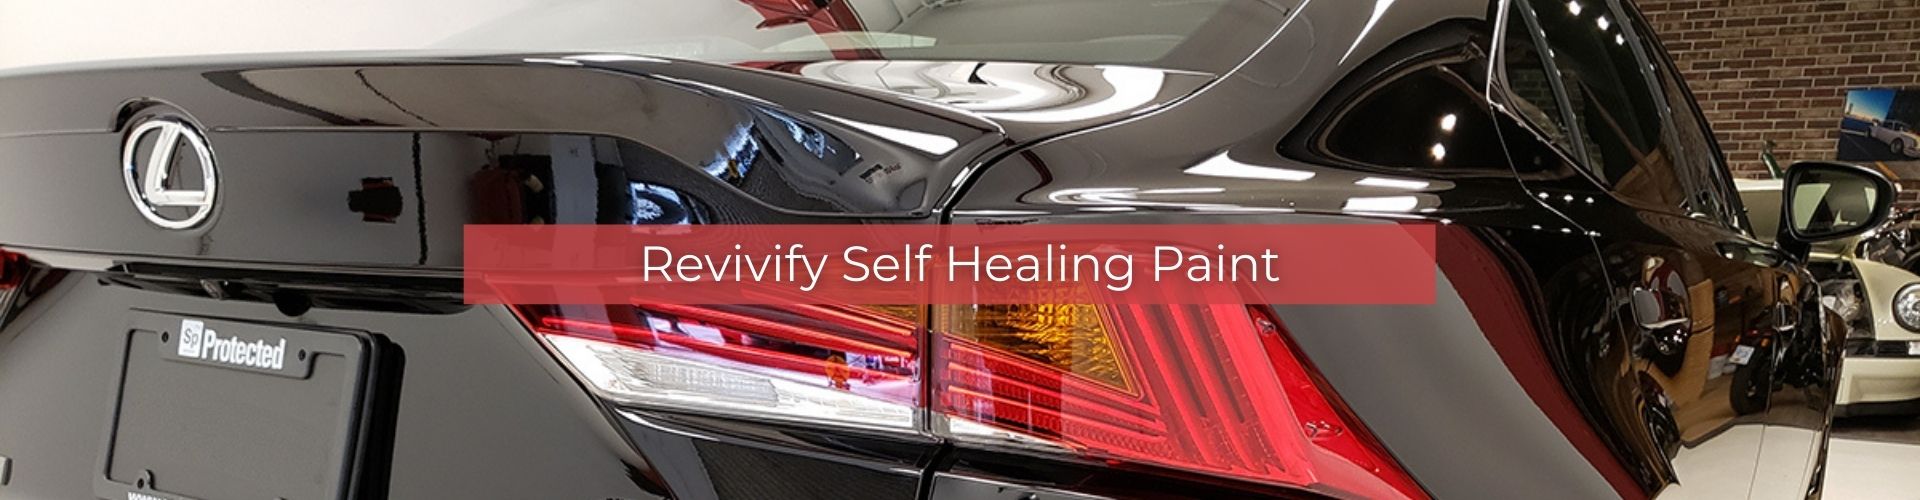 Revivify Self Healing Paint Protection